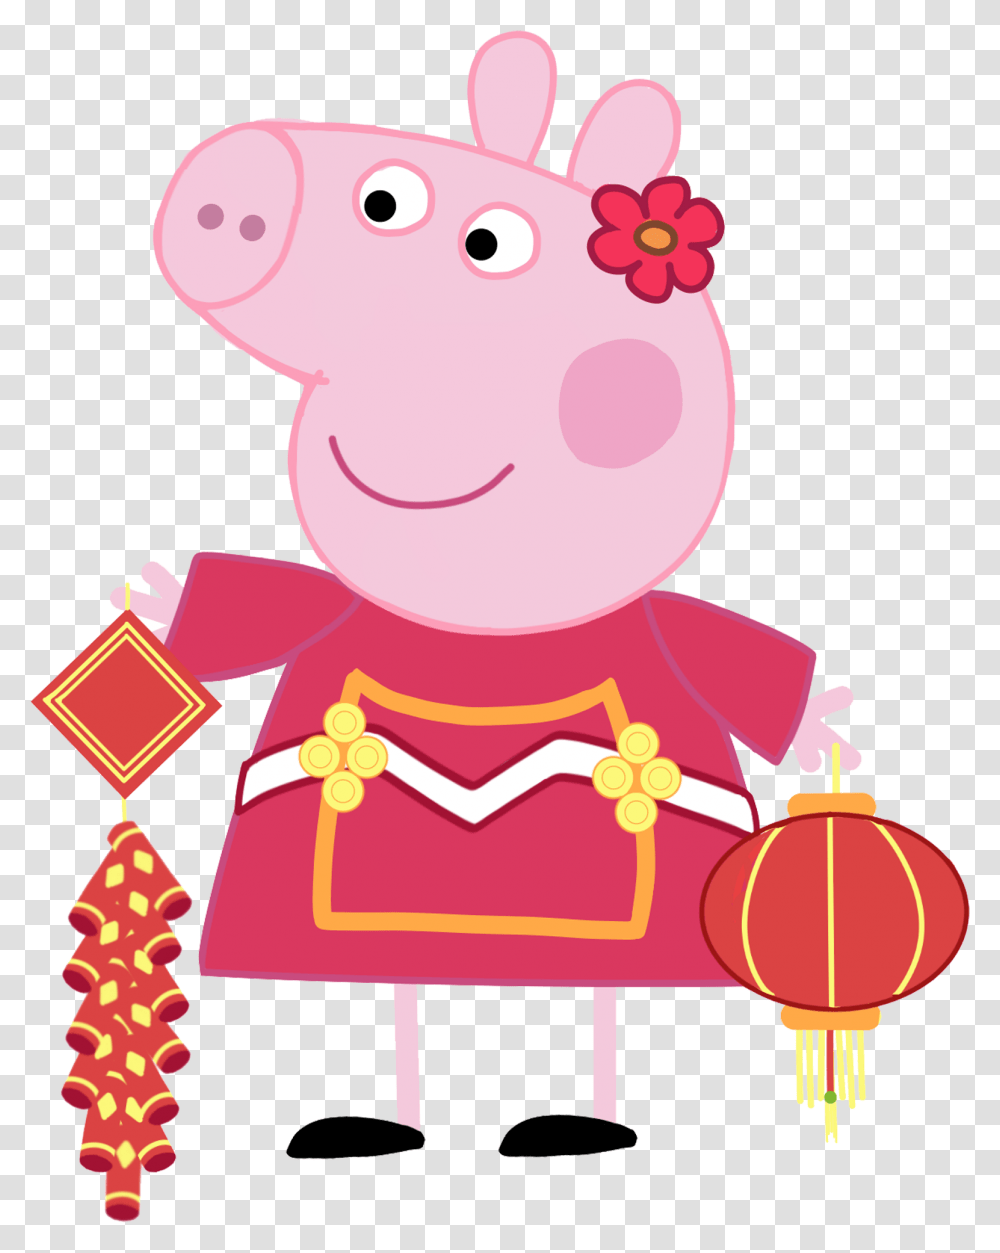 Peppa Pig In Different Outfits Transparent Png